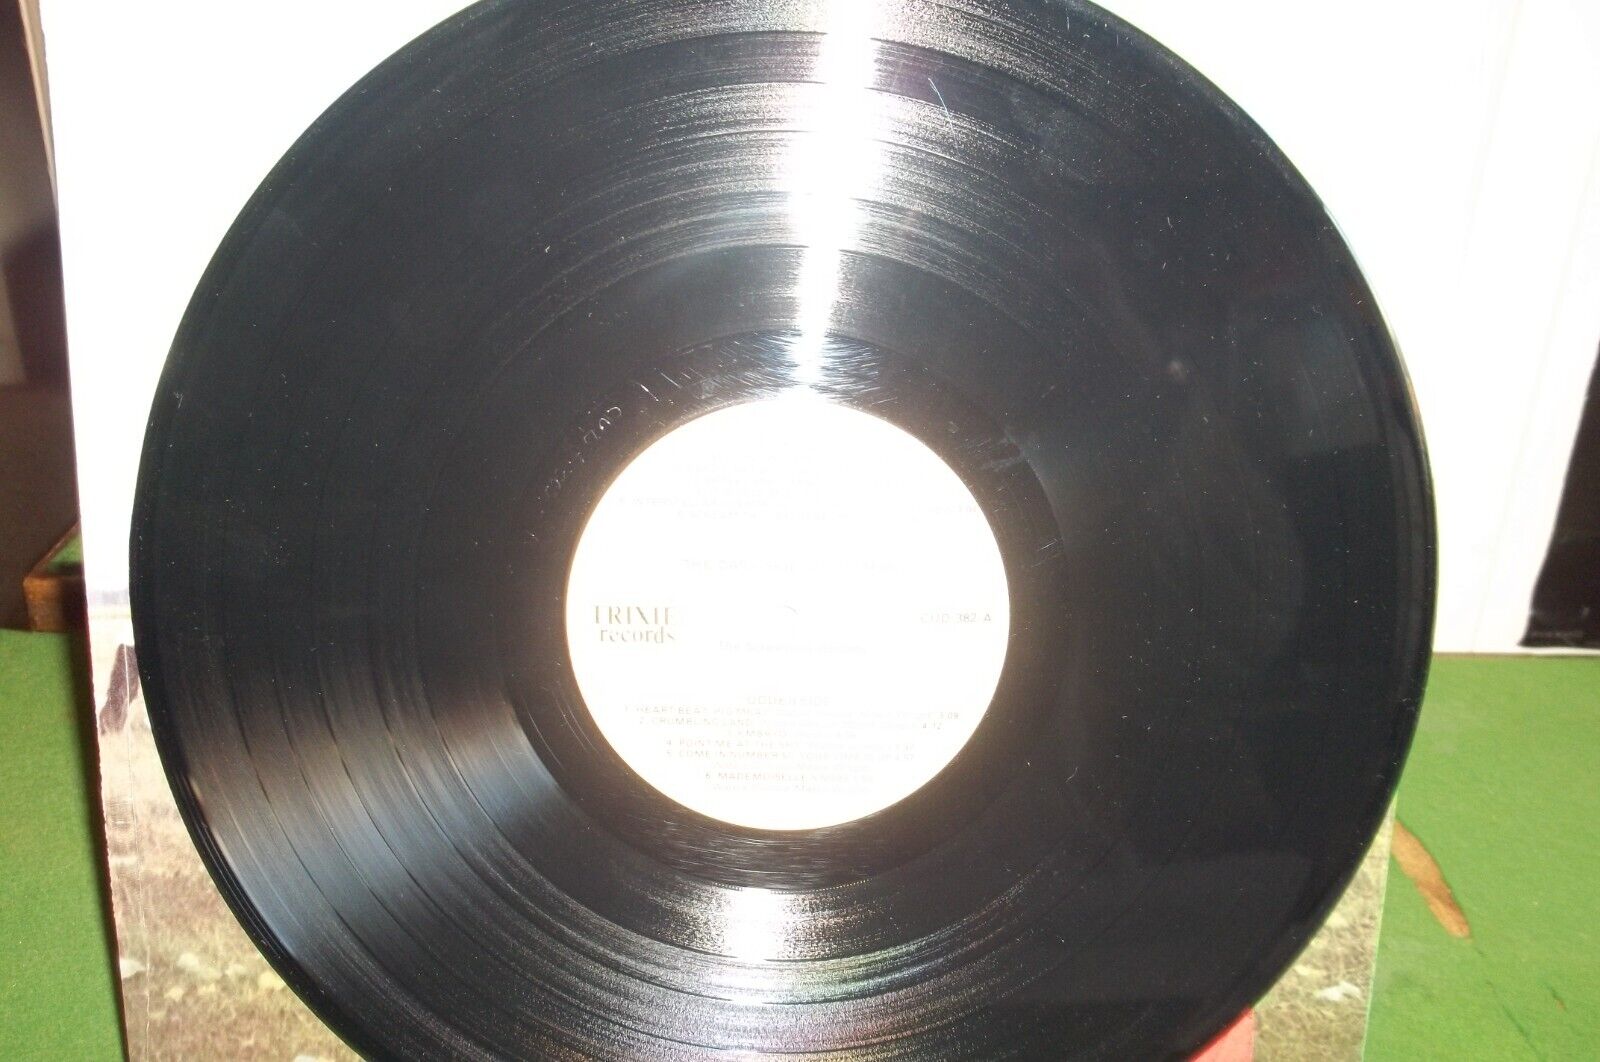 Pic 4 PINK FLOYD LP "DARK SIDE OF THE MOO" TRIXIE CUD-382  EX/EX  THE SCREAMING ABDABS